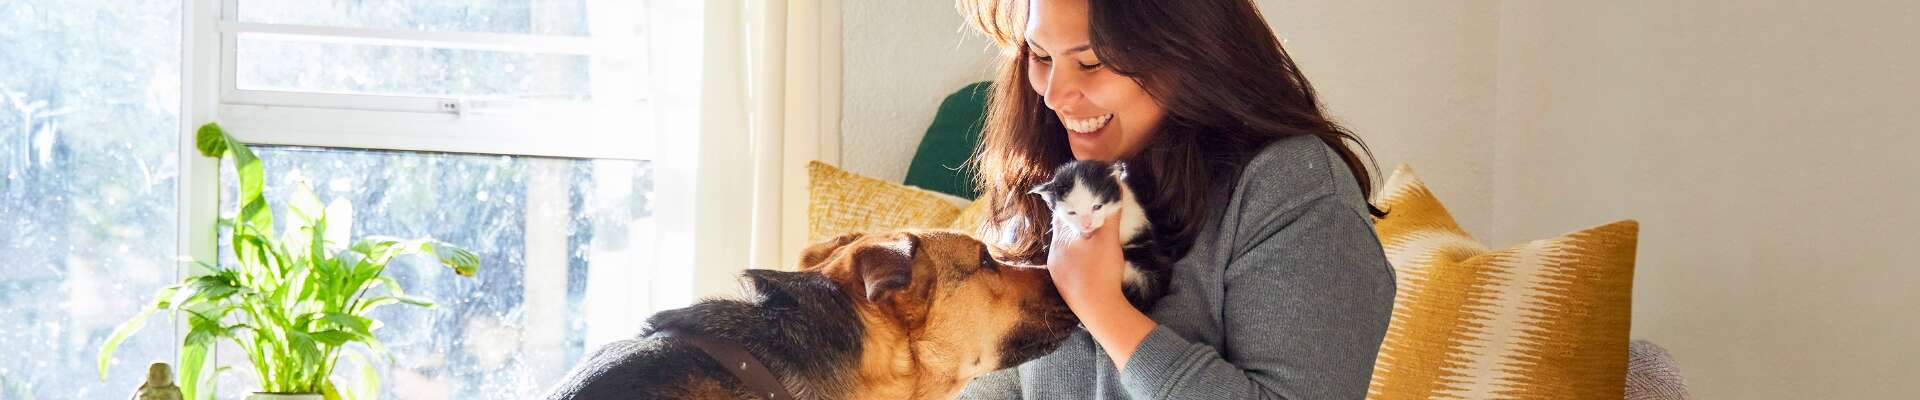 Smiling woman holding a kitten and petting a dog